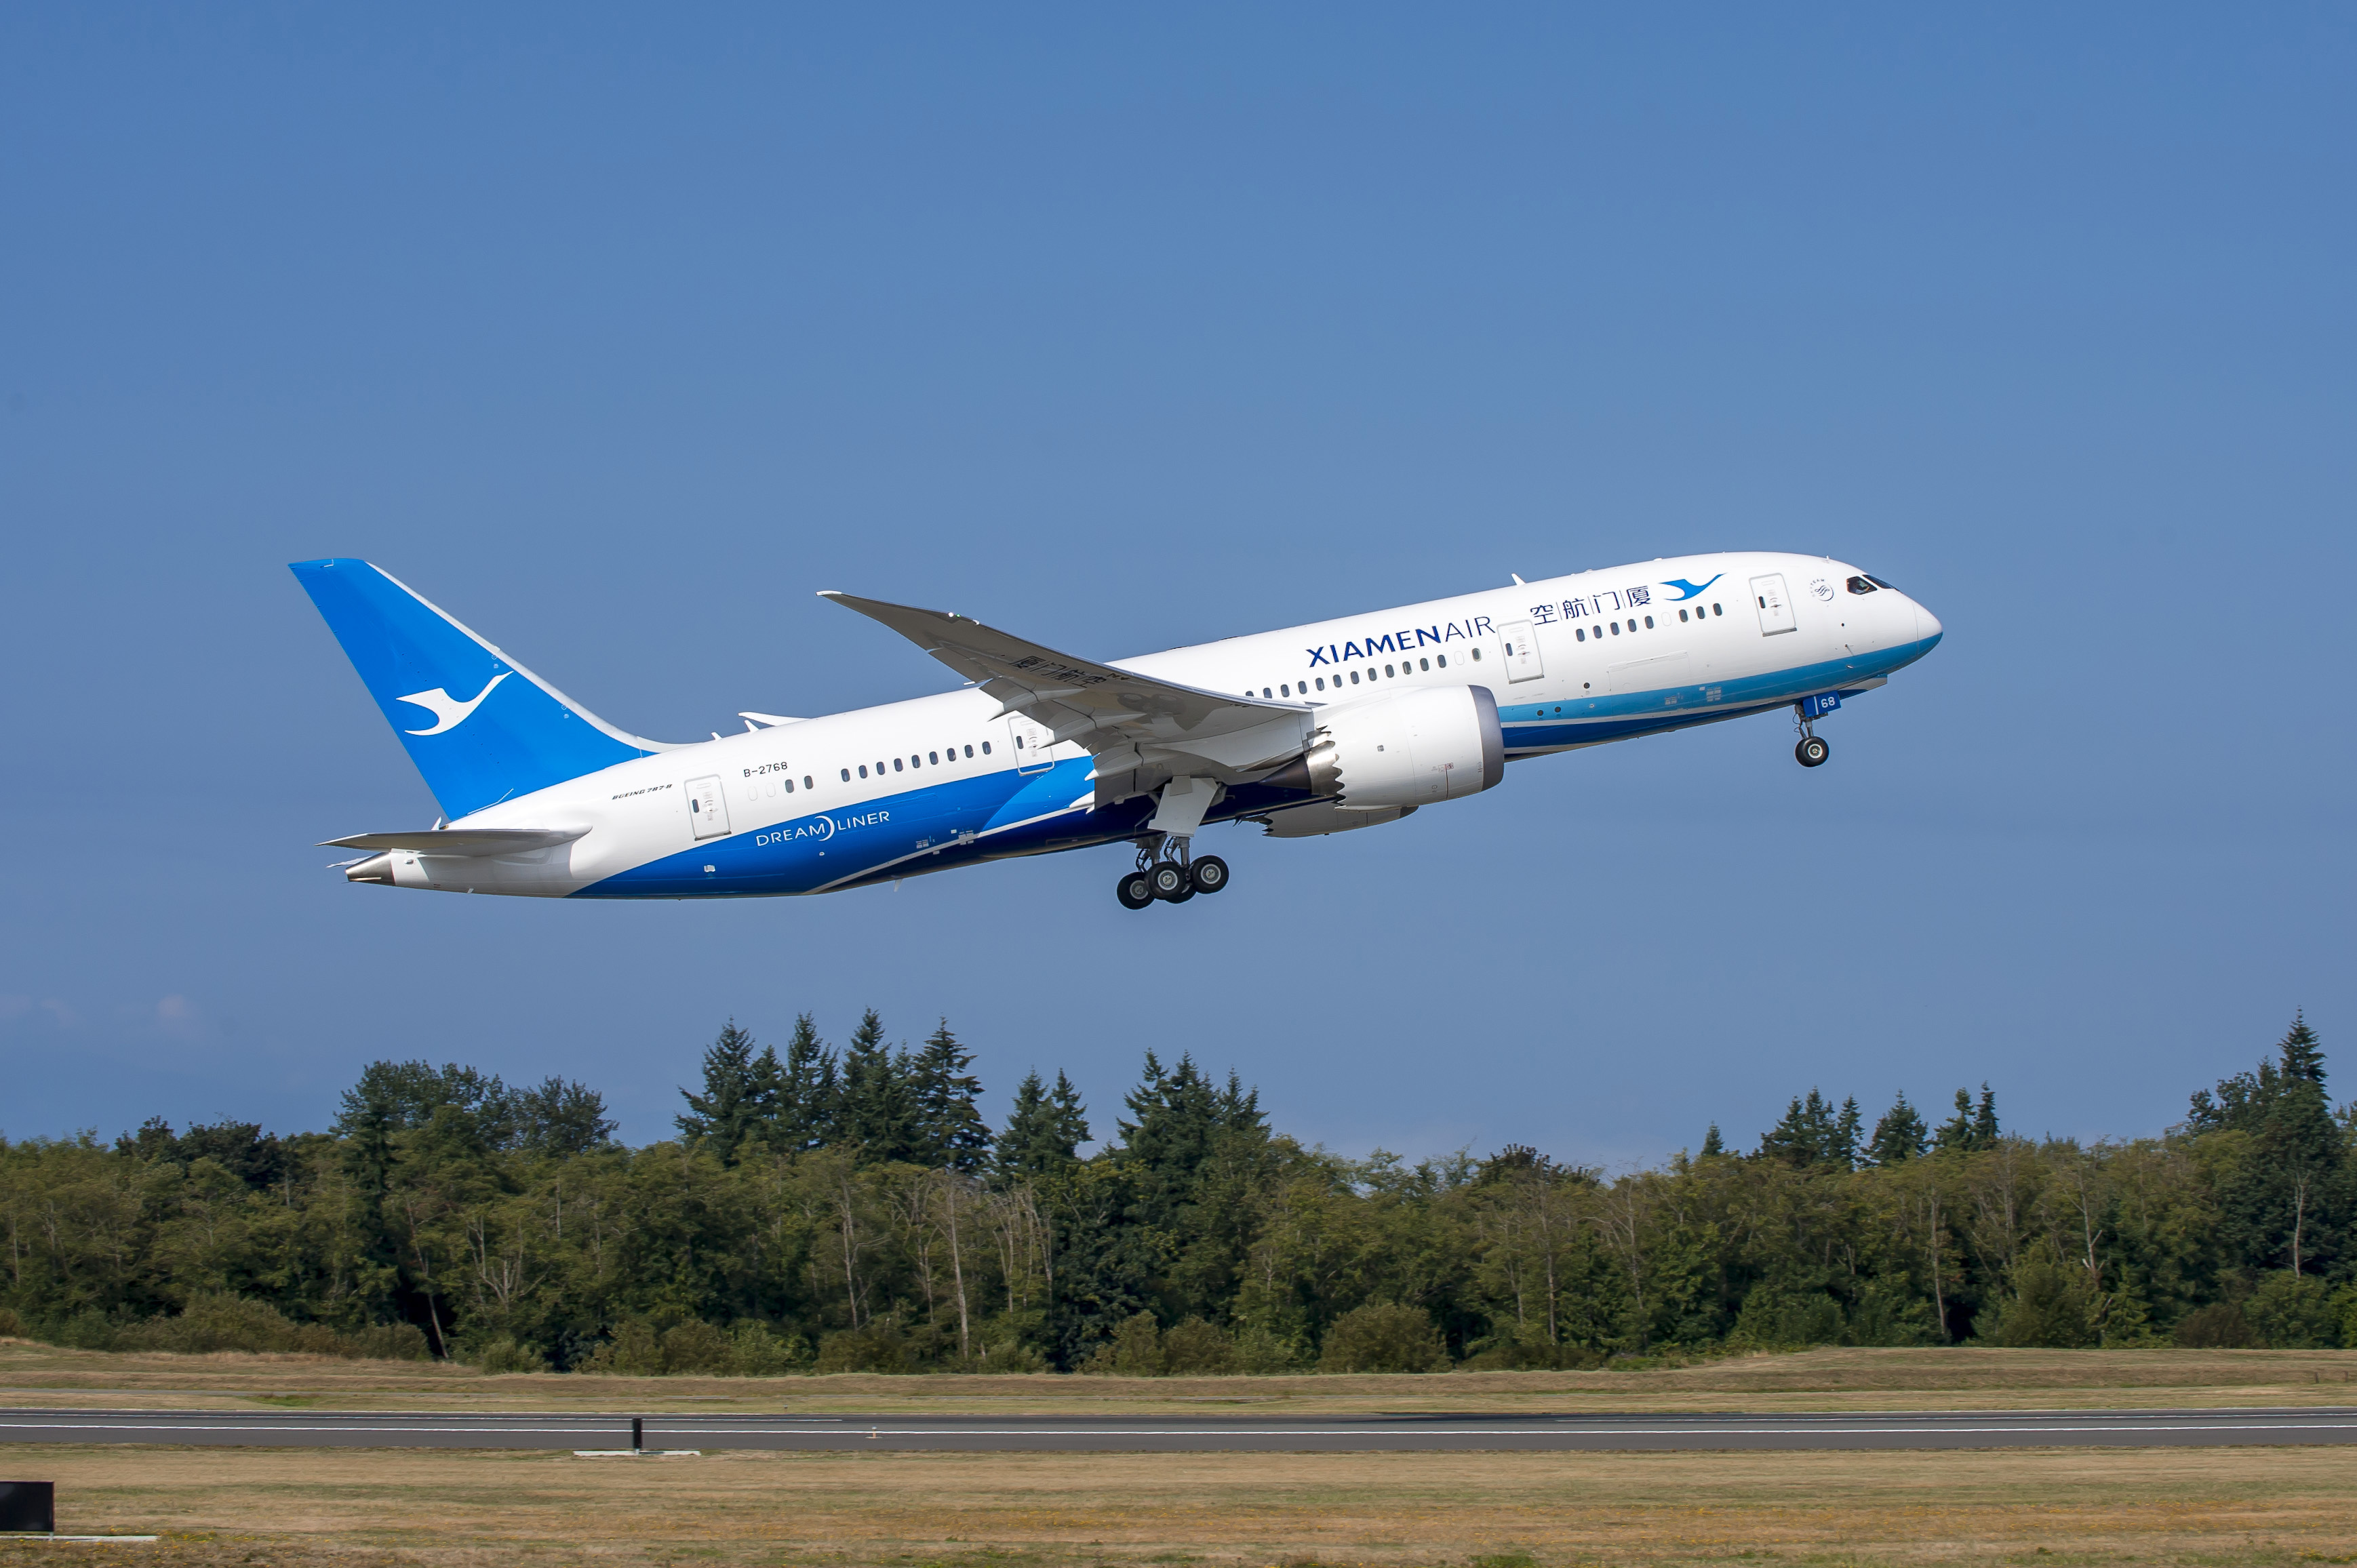 Xiamen's first Boeing 787 conducting test flights at Paine Field - Photo: The Boeing Company